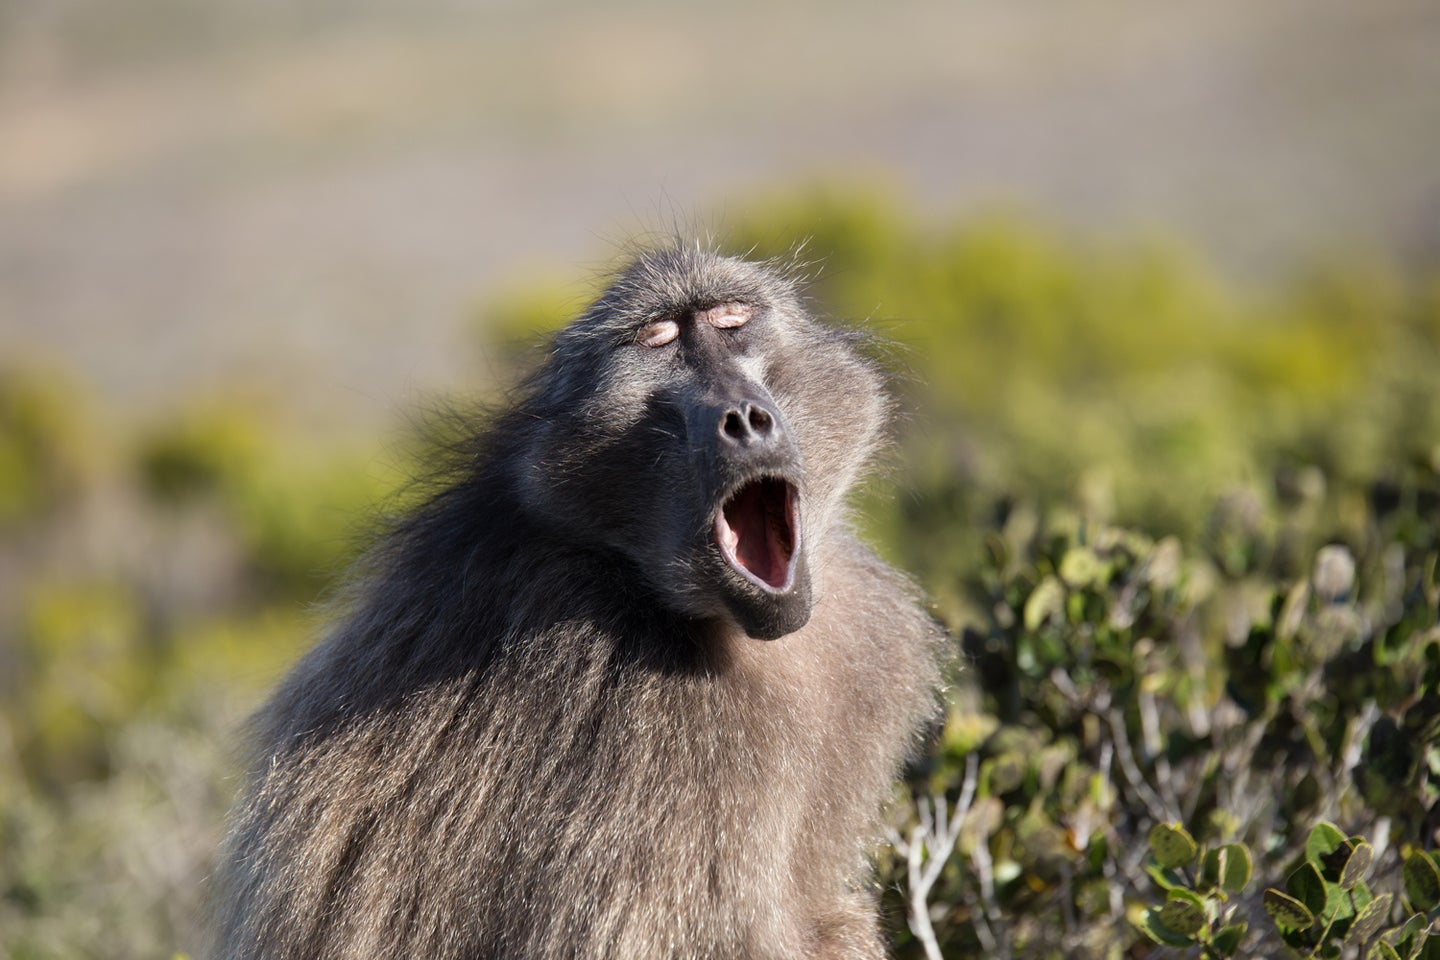 Baboon making sounds